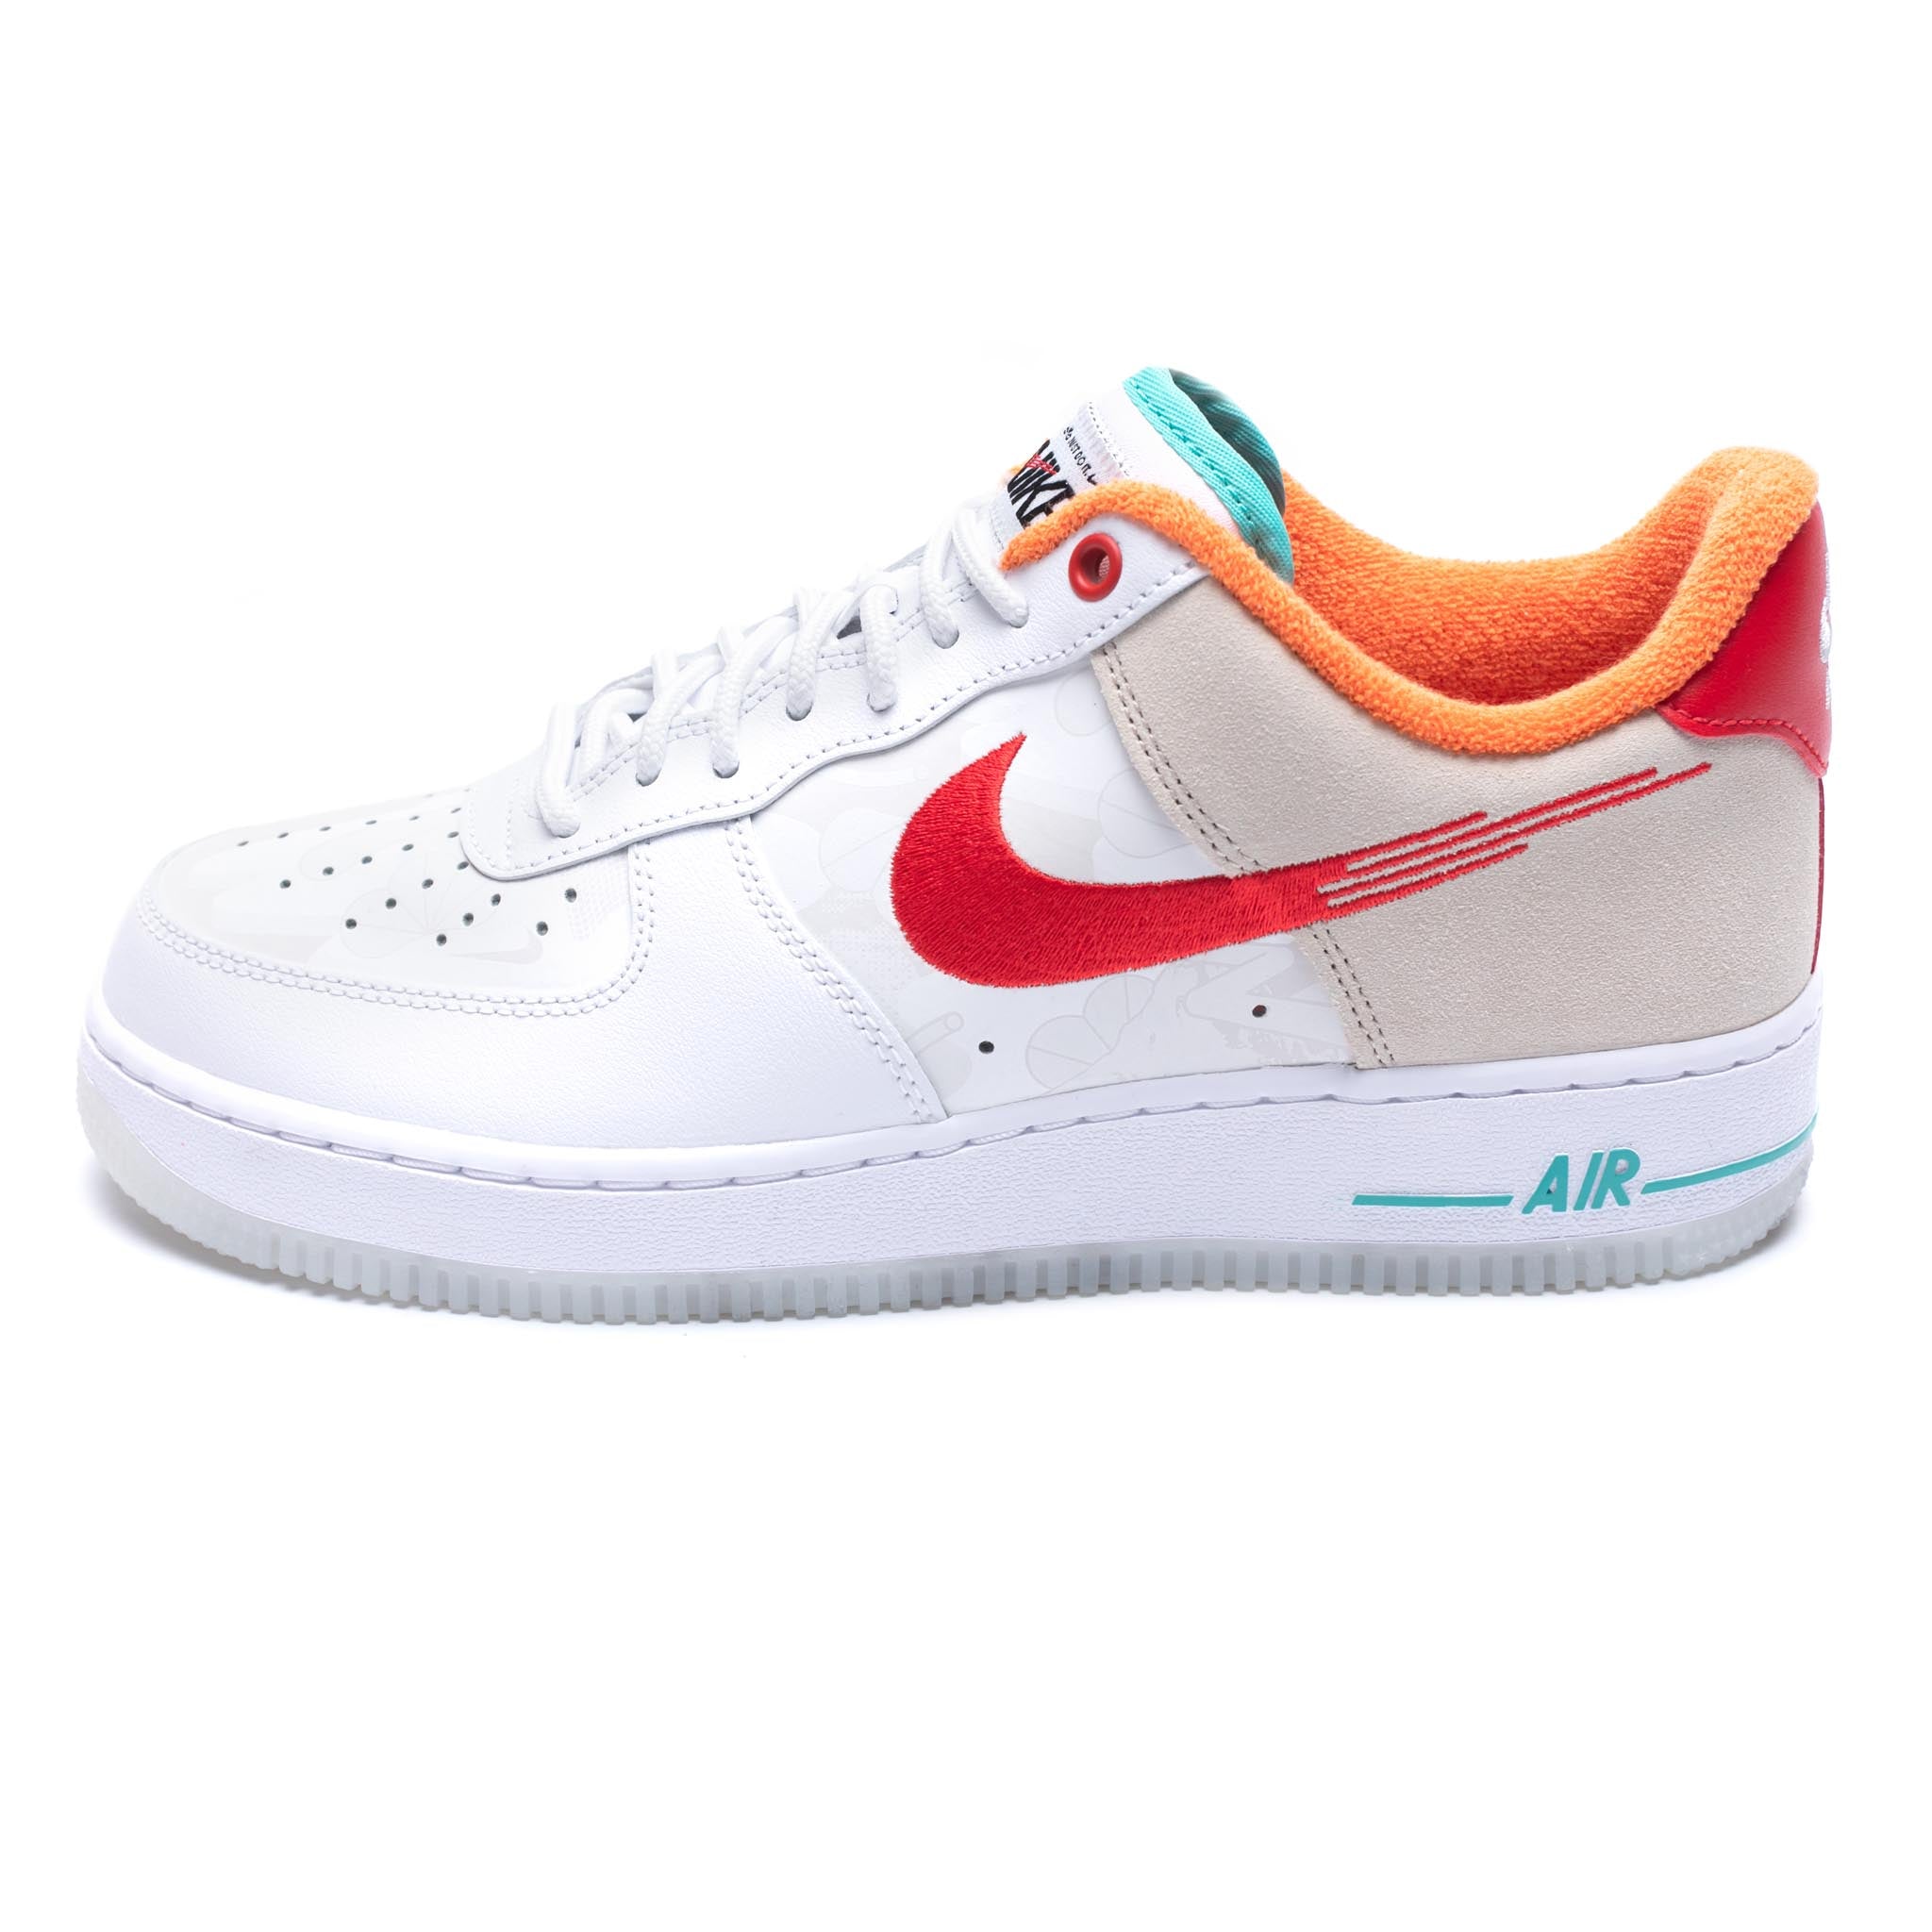 Nike Air Force 1 '07 PRM 'Just Do It'